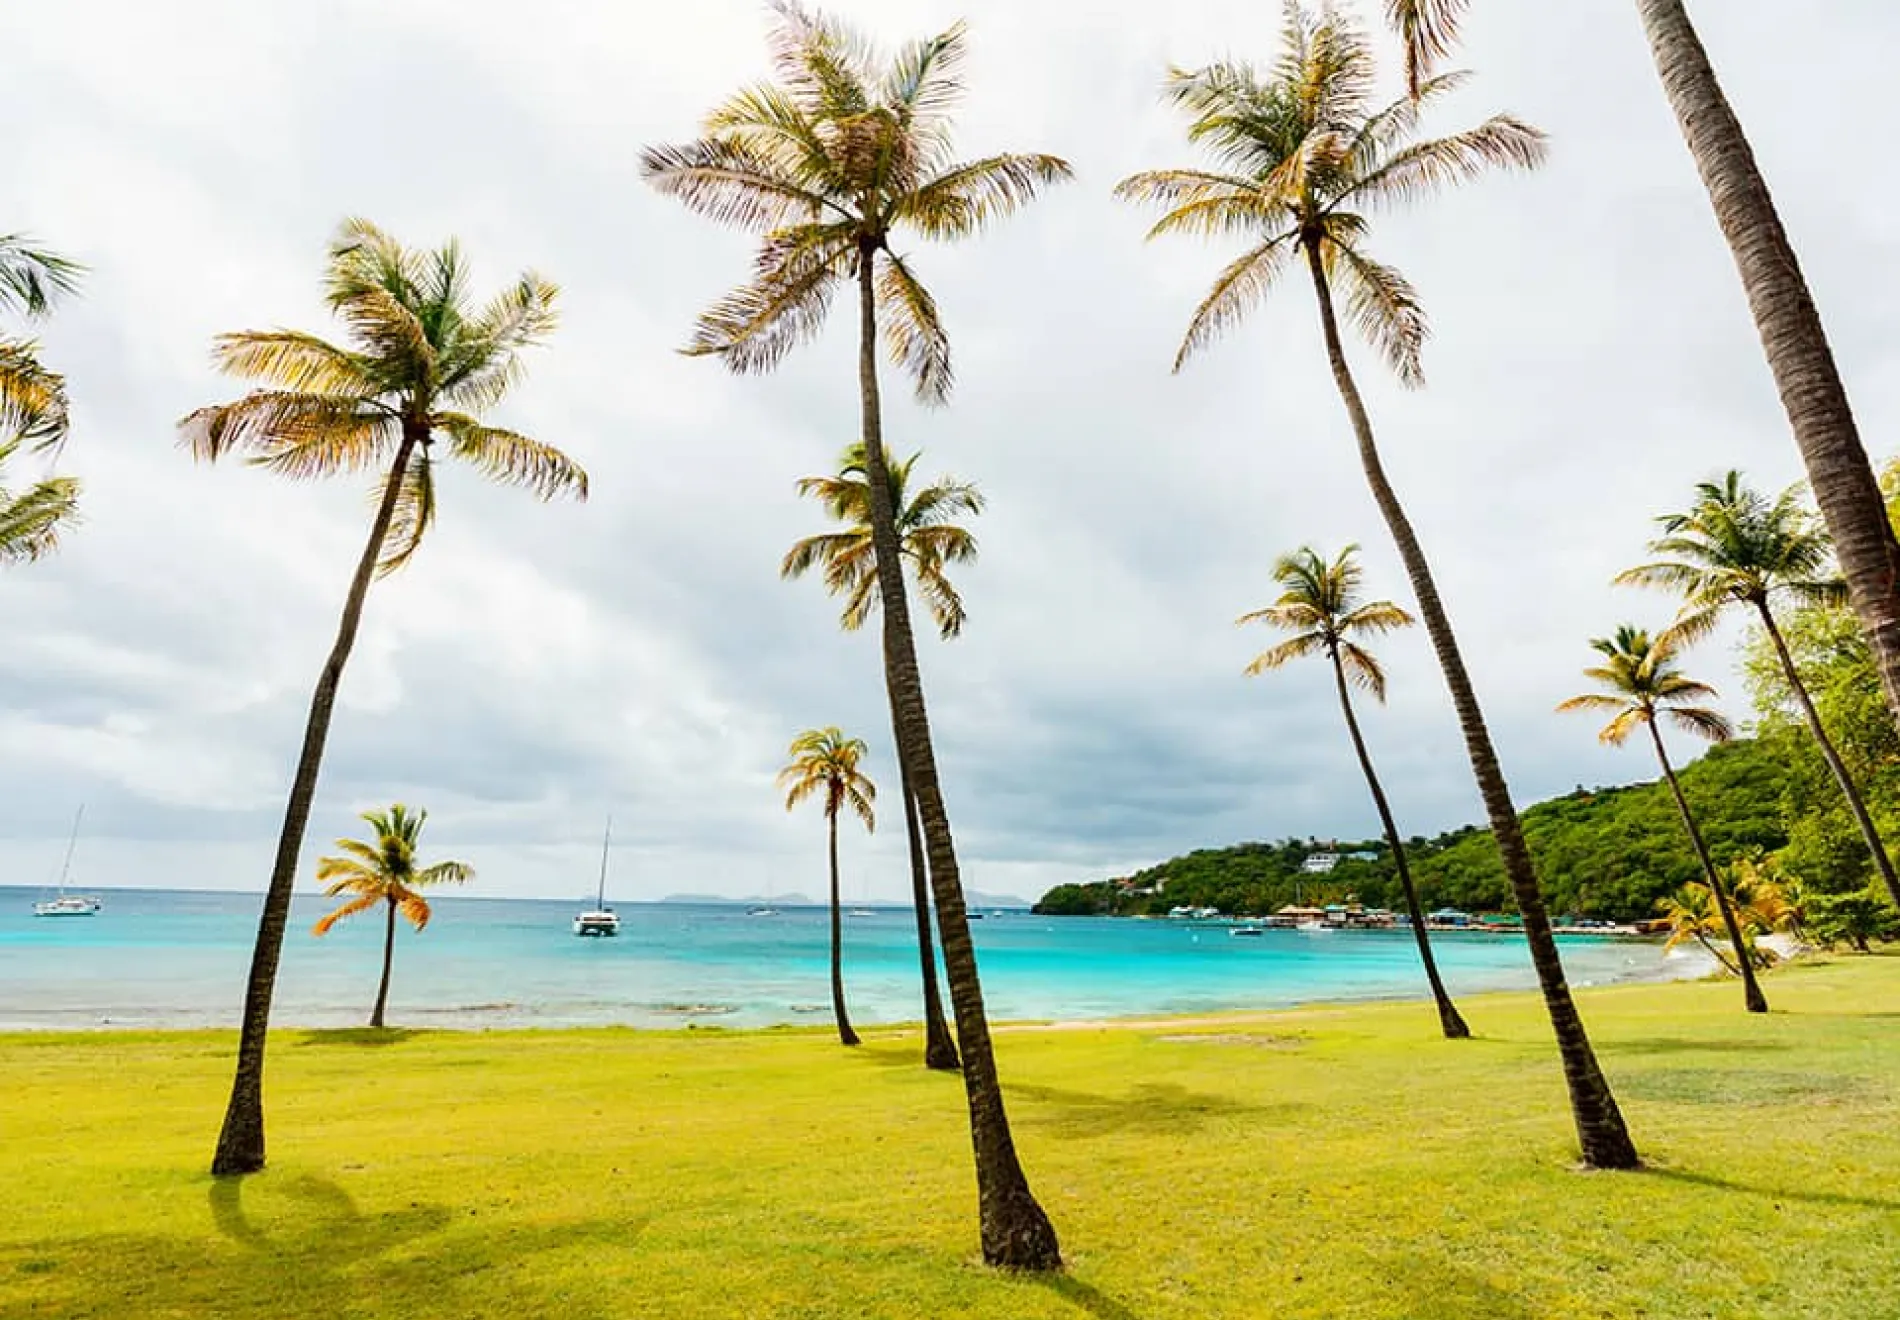 Idyllic-tropical-beach-with-white-sand-palm-trees-and-turquoise-Caribbean-sea-water-on-Mustique-island-in-St-Vincent-and-the-Grenadines